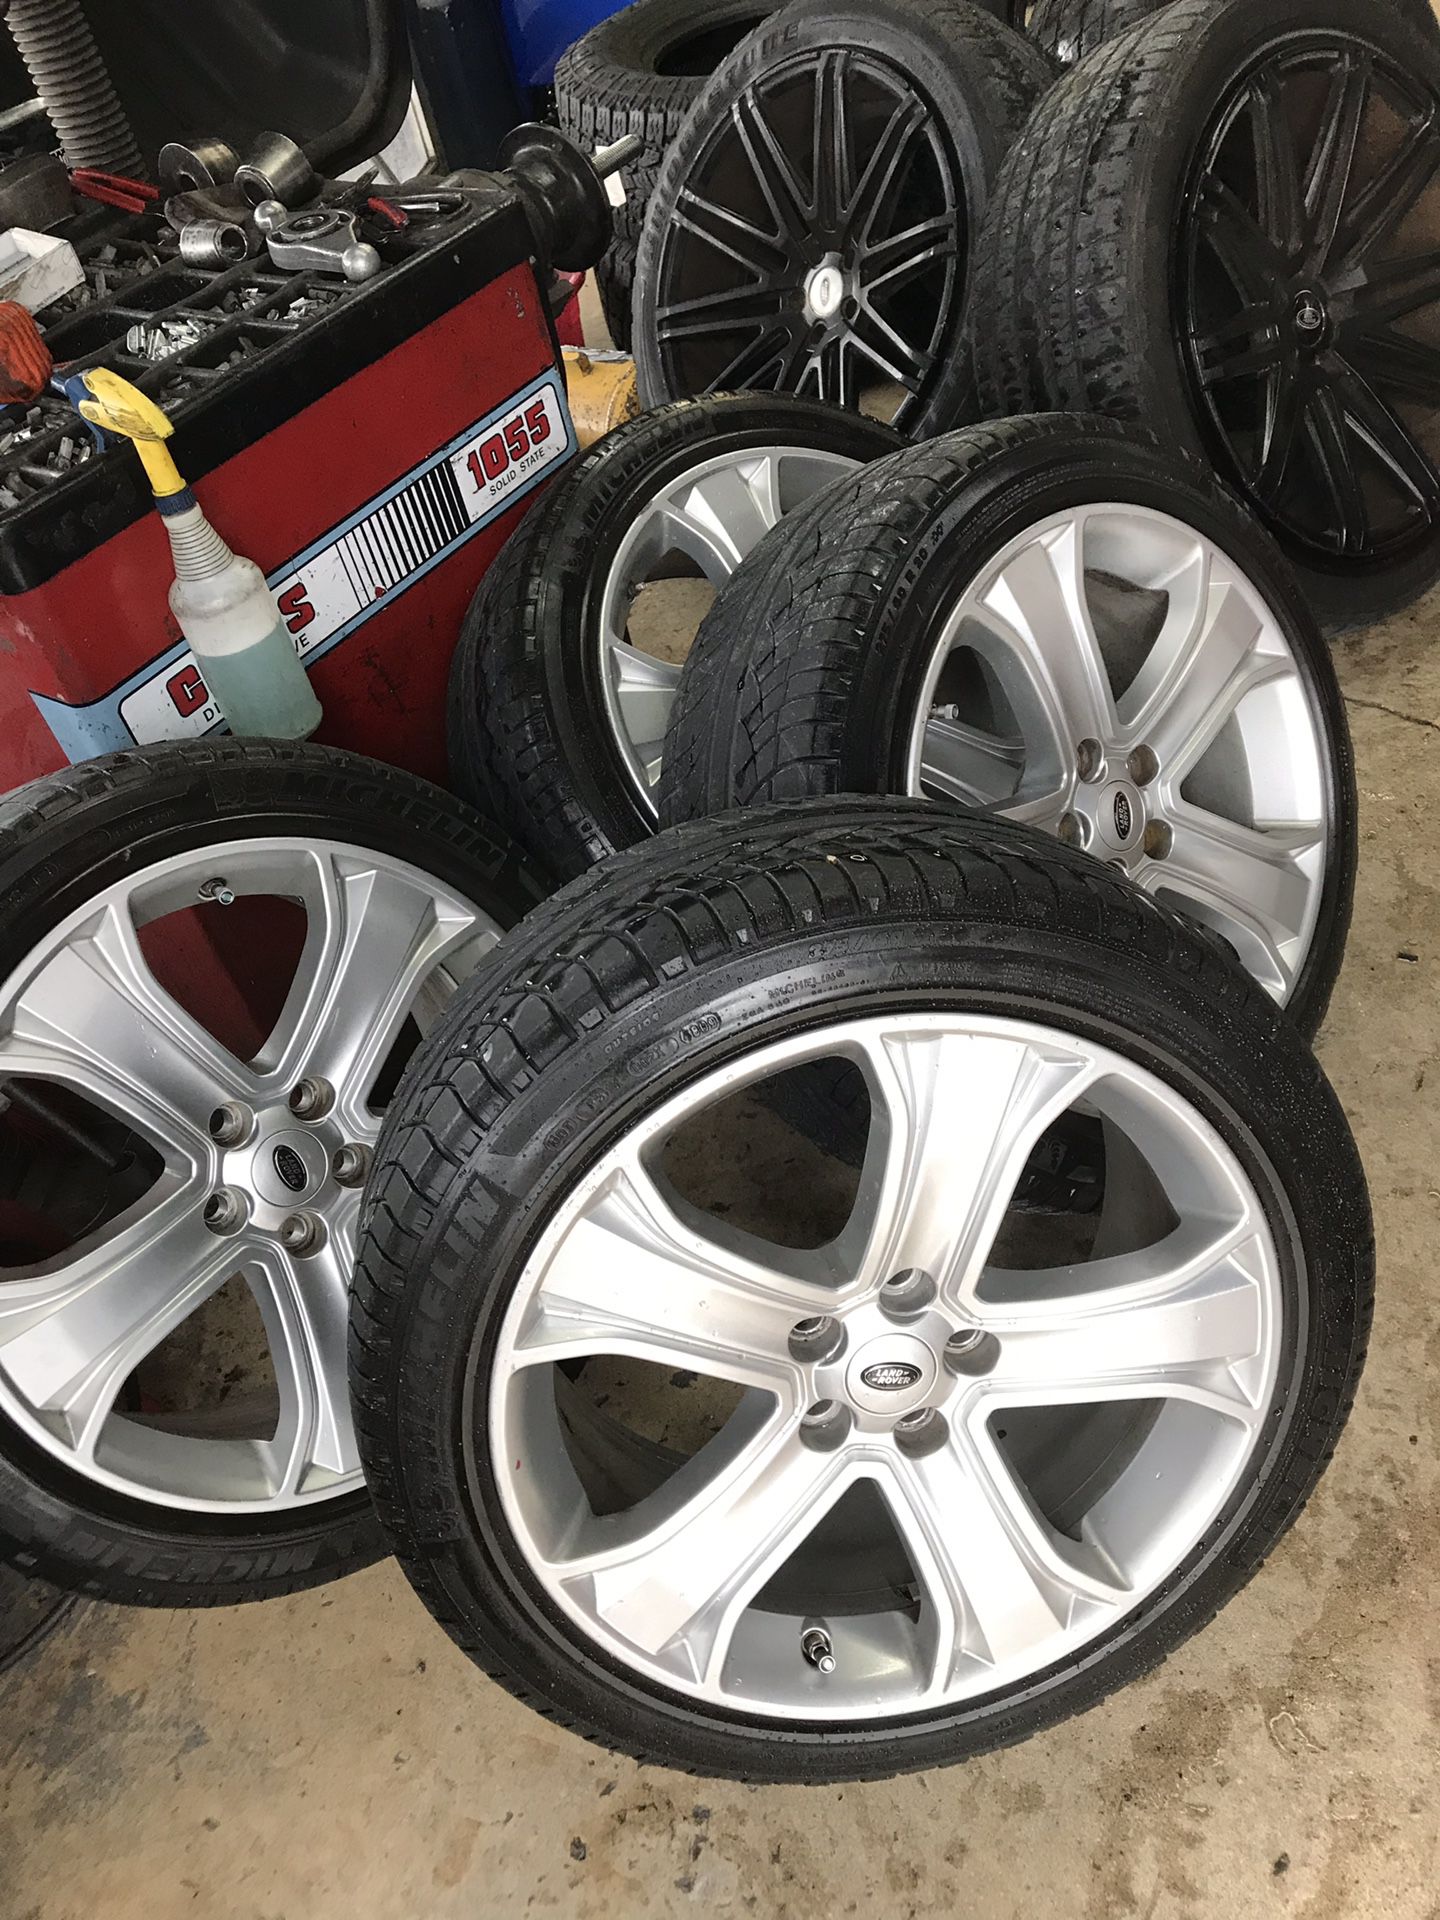 For sale land rover Range Rover 2013 supercharger 20 rims wheels and Michelin tires and lugs Rims and tires like new the lugs nuts are also new